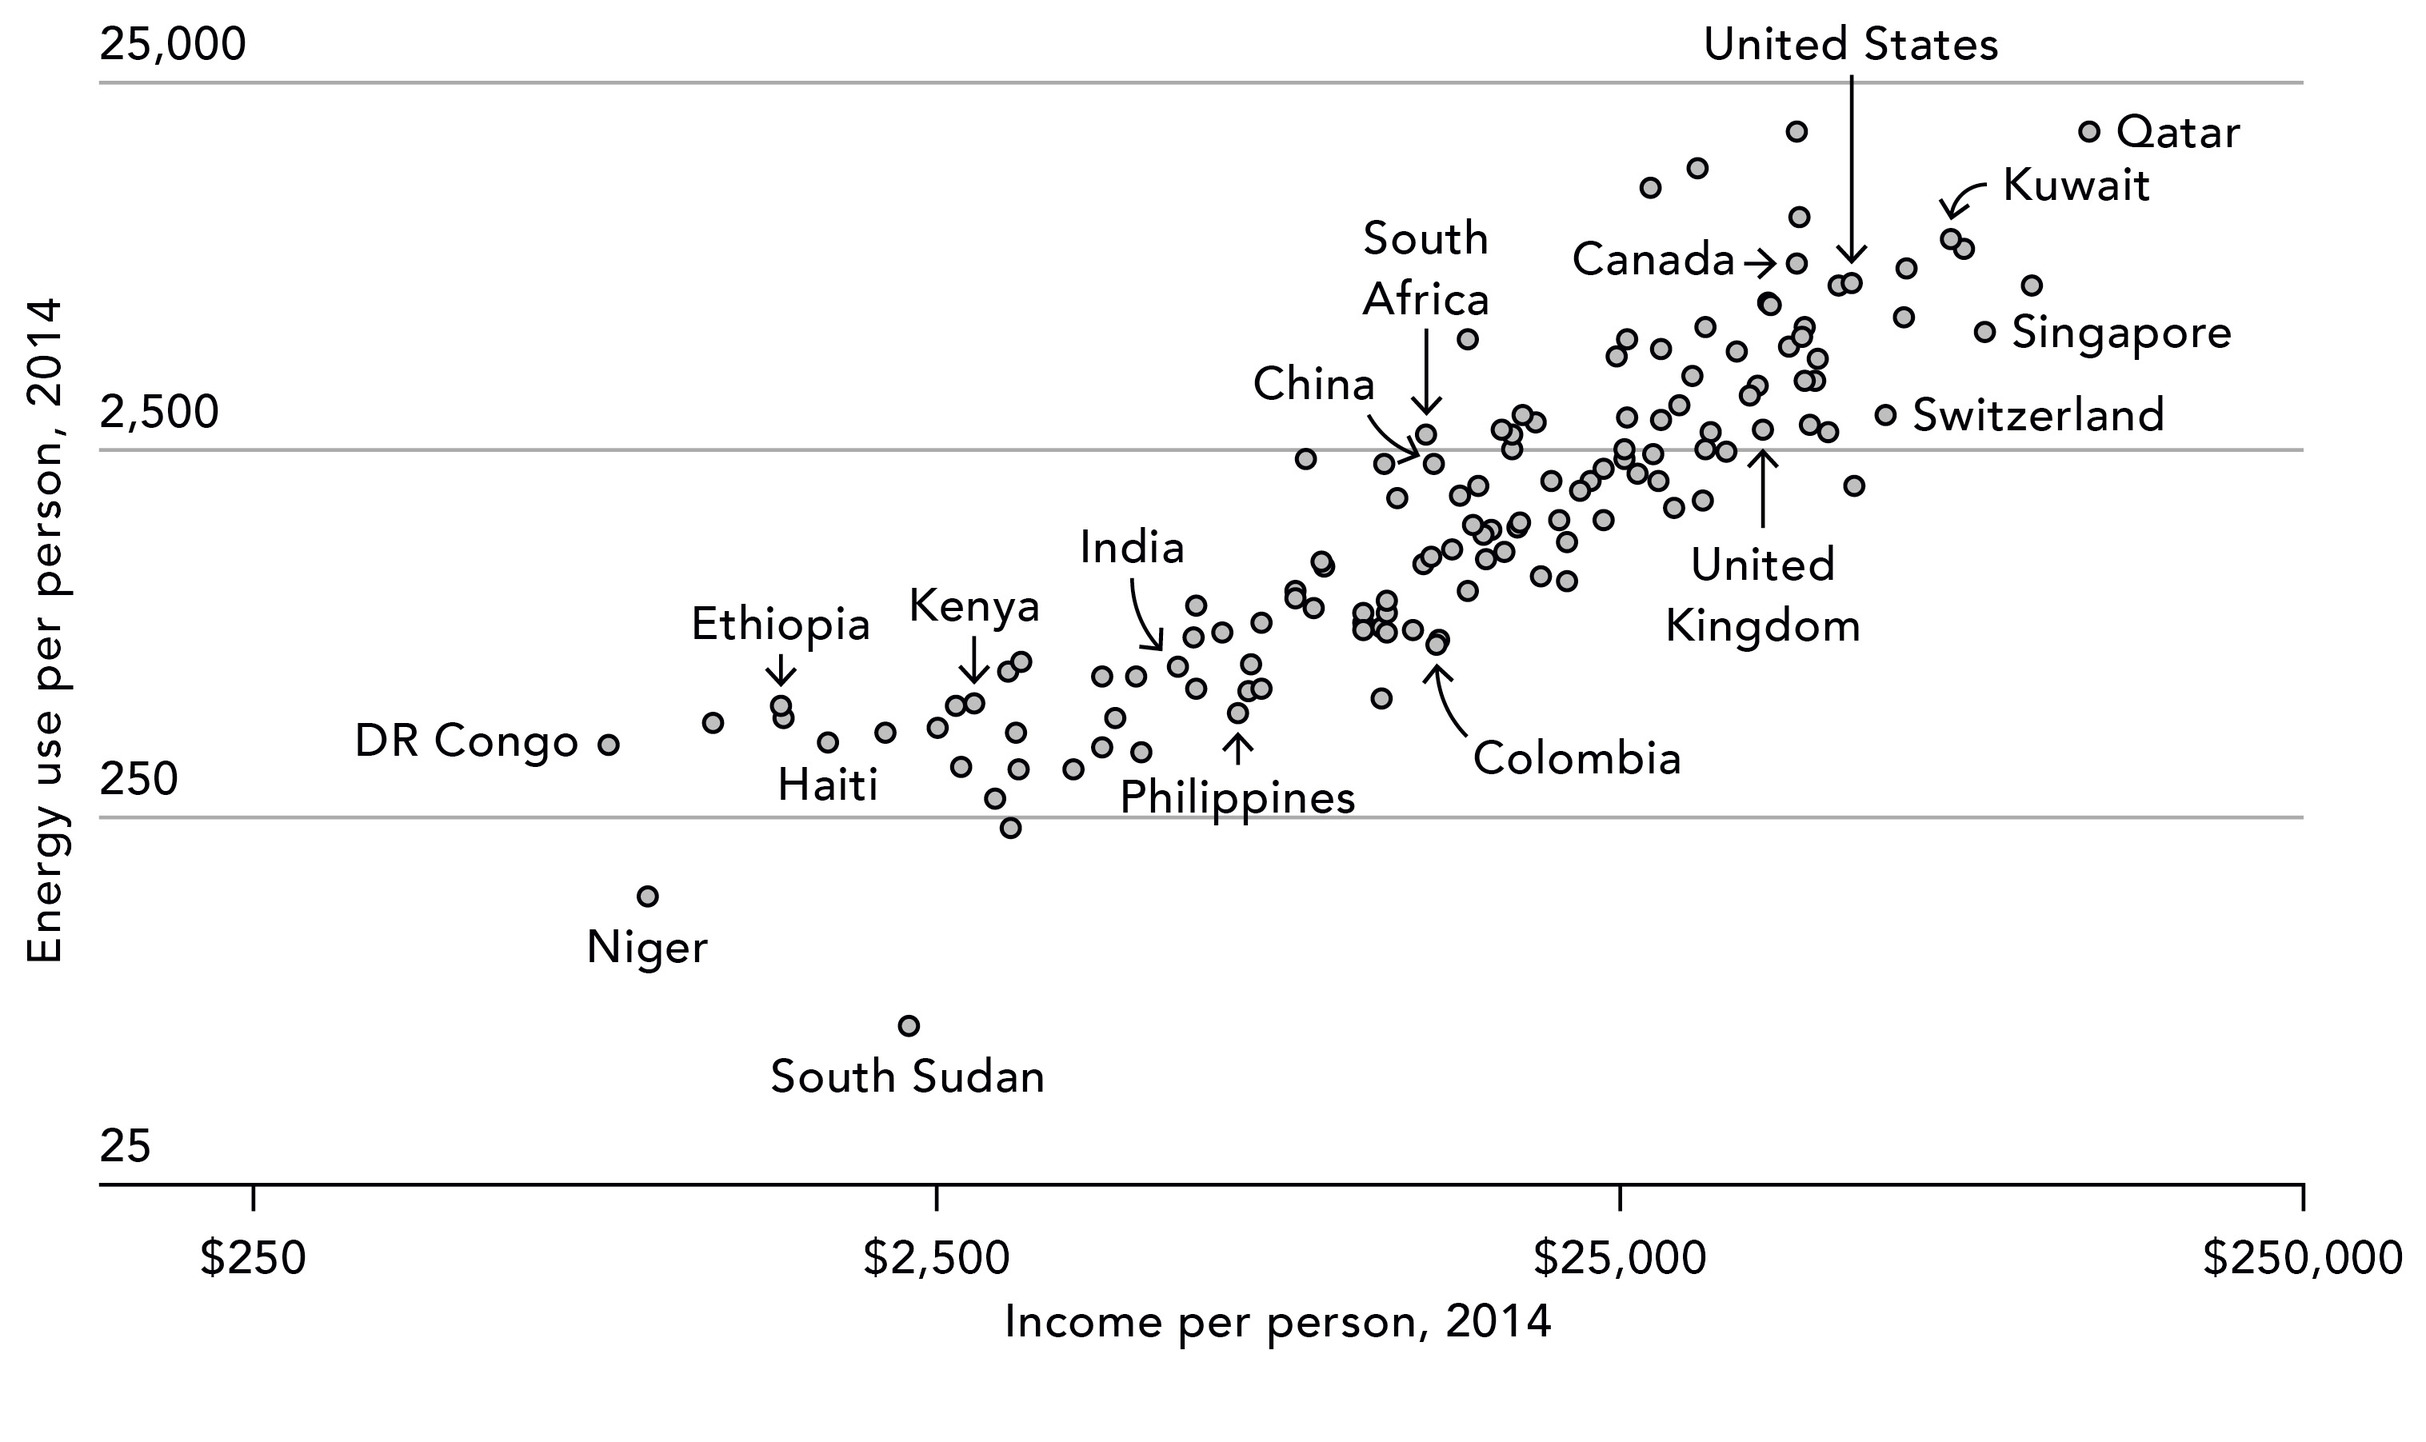 Chart shows that countries with higher income per person also use more energy per person and countries with lower income per person use less energy per person.